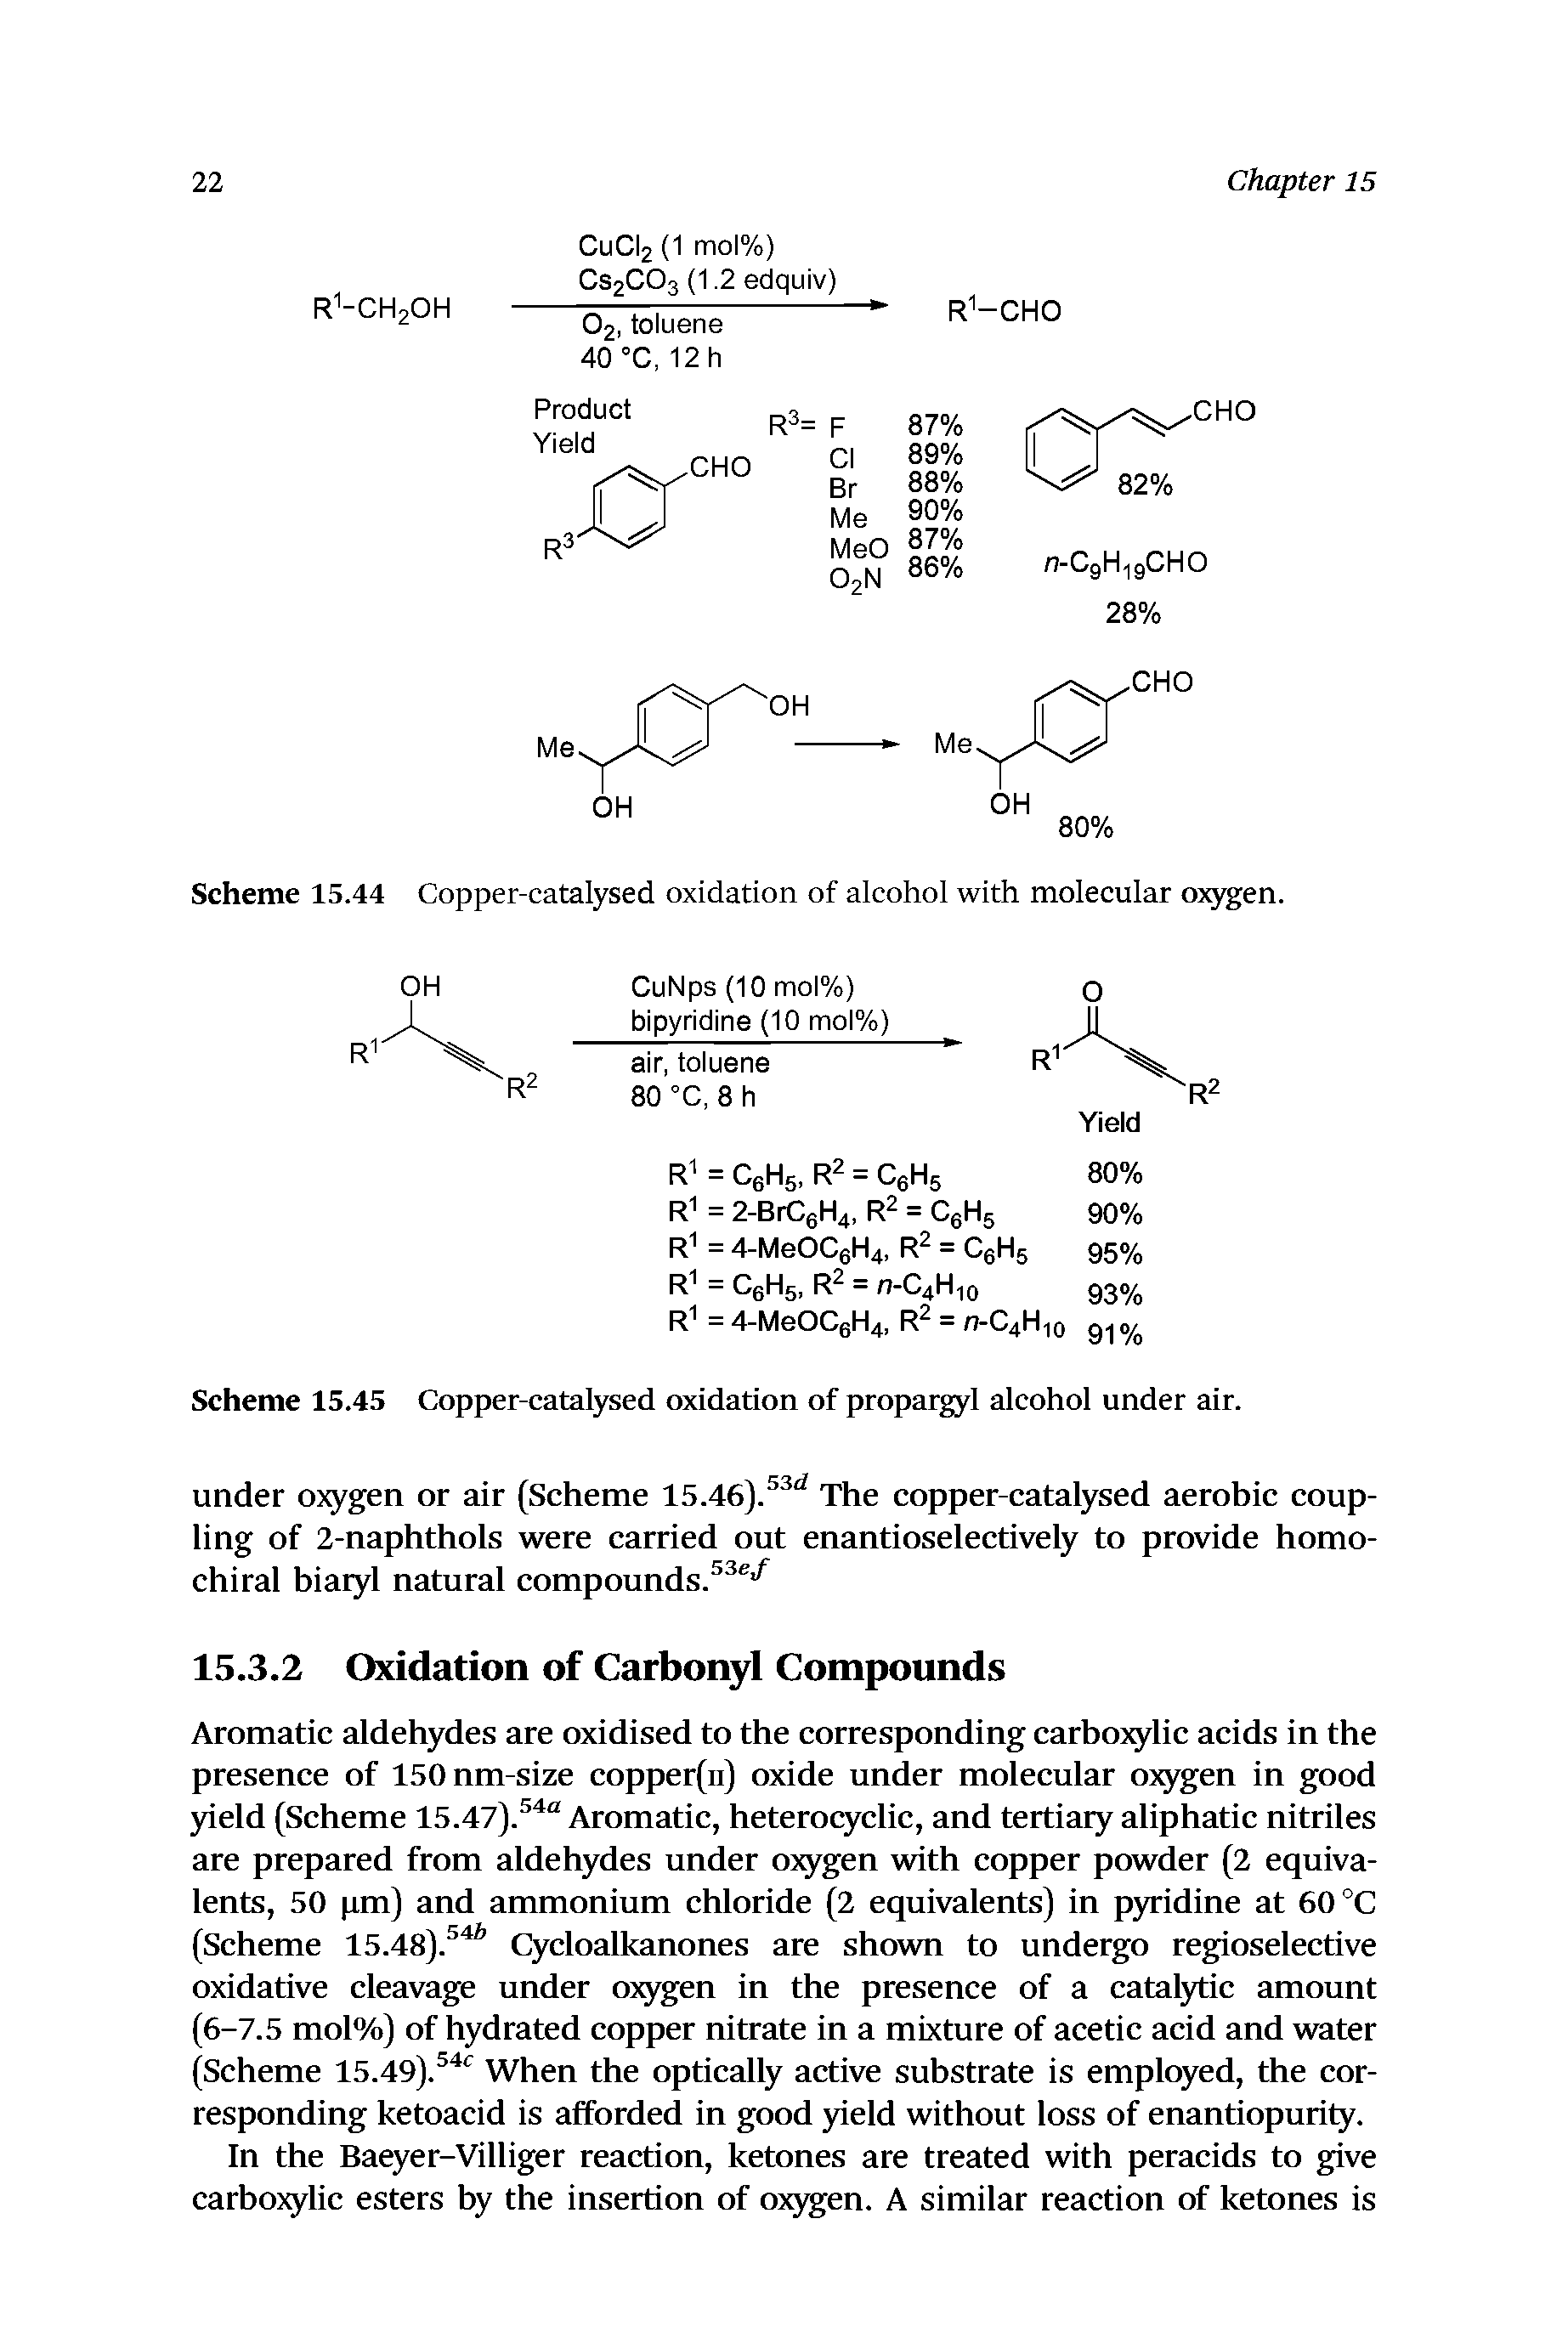 Scheme 15.45 Copper-catalysed oxidation of propargyl alcohol under air.